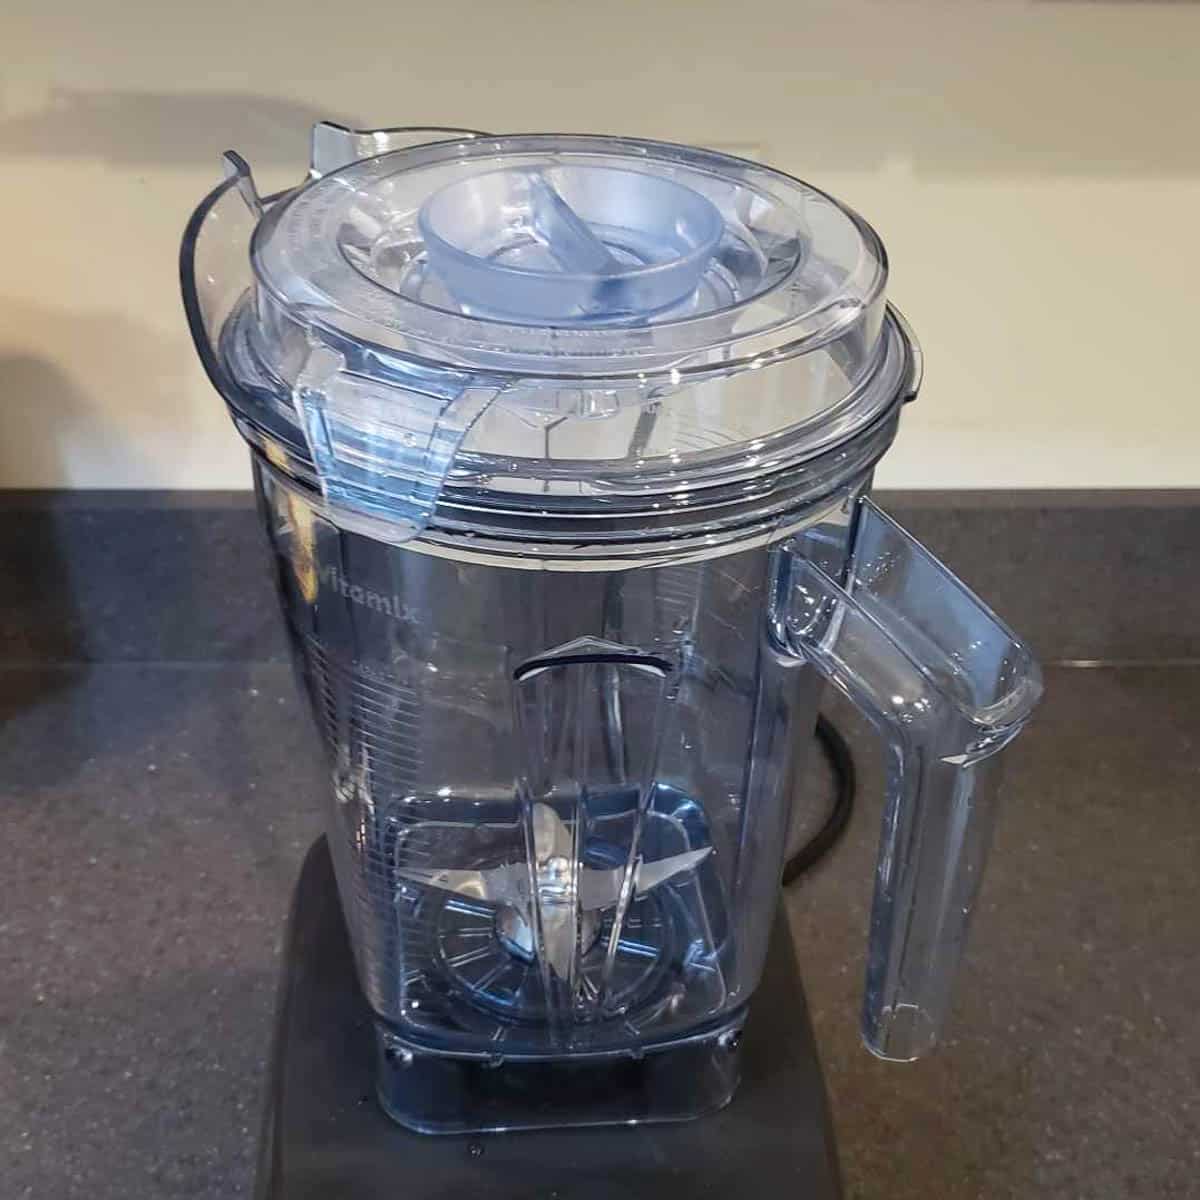 Profile of the Vitamix pitcher